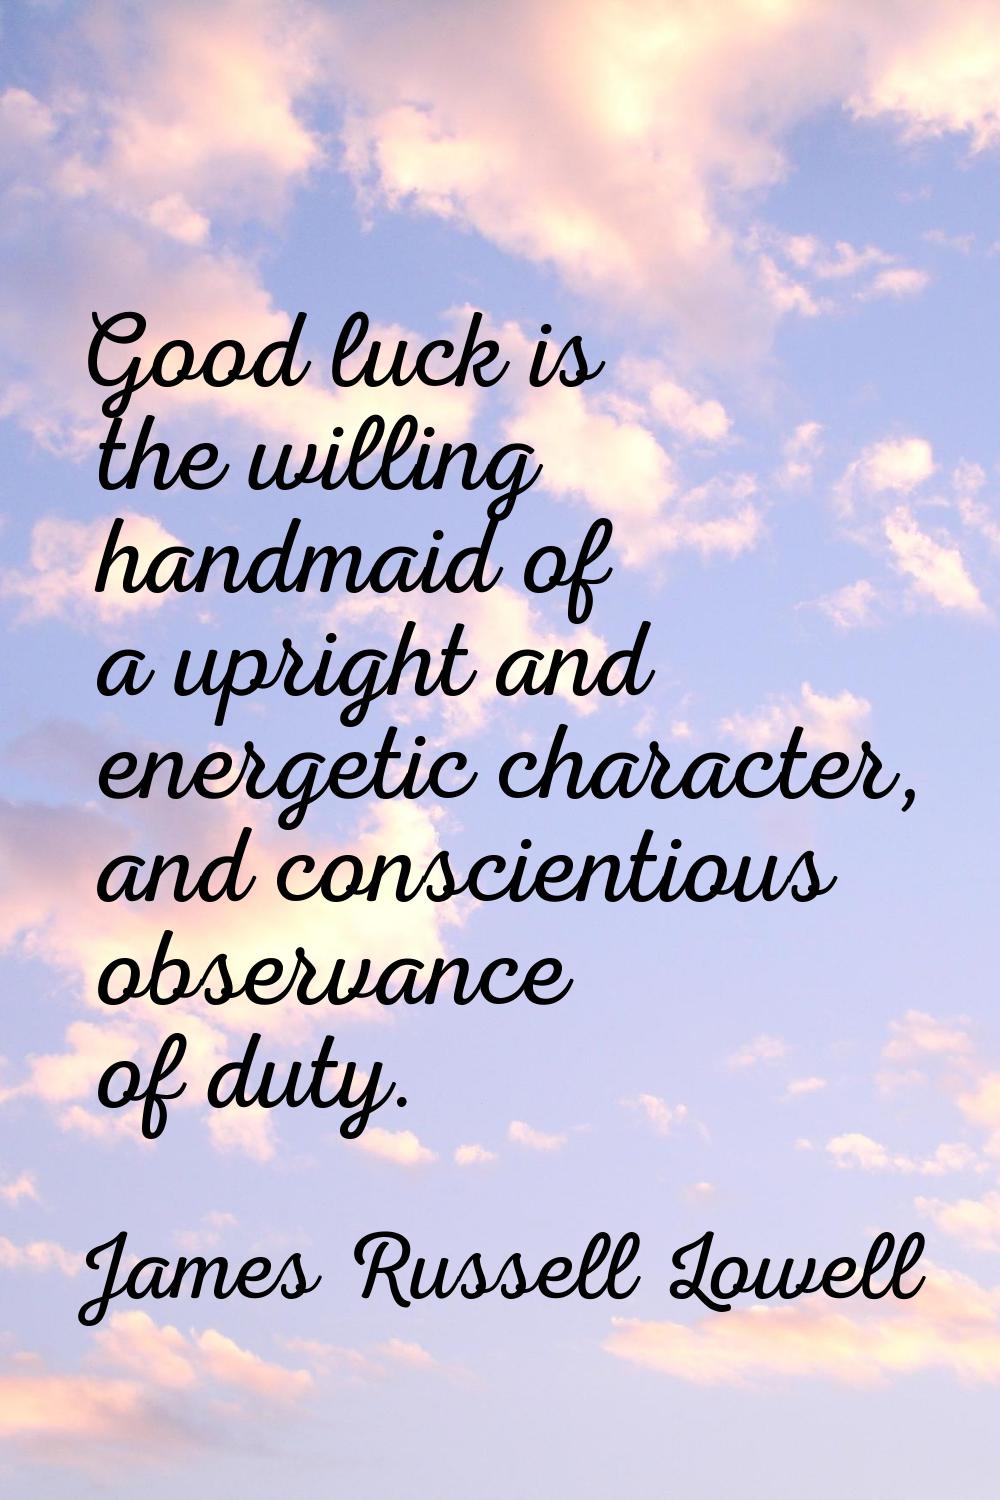 Good luck is the willing handmaid of a upright and energetic character, and conscientious observanc